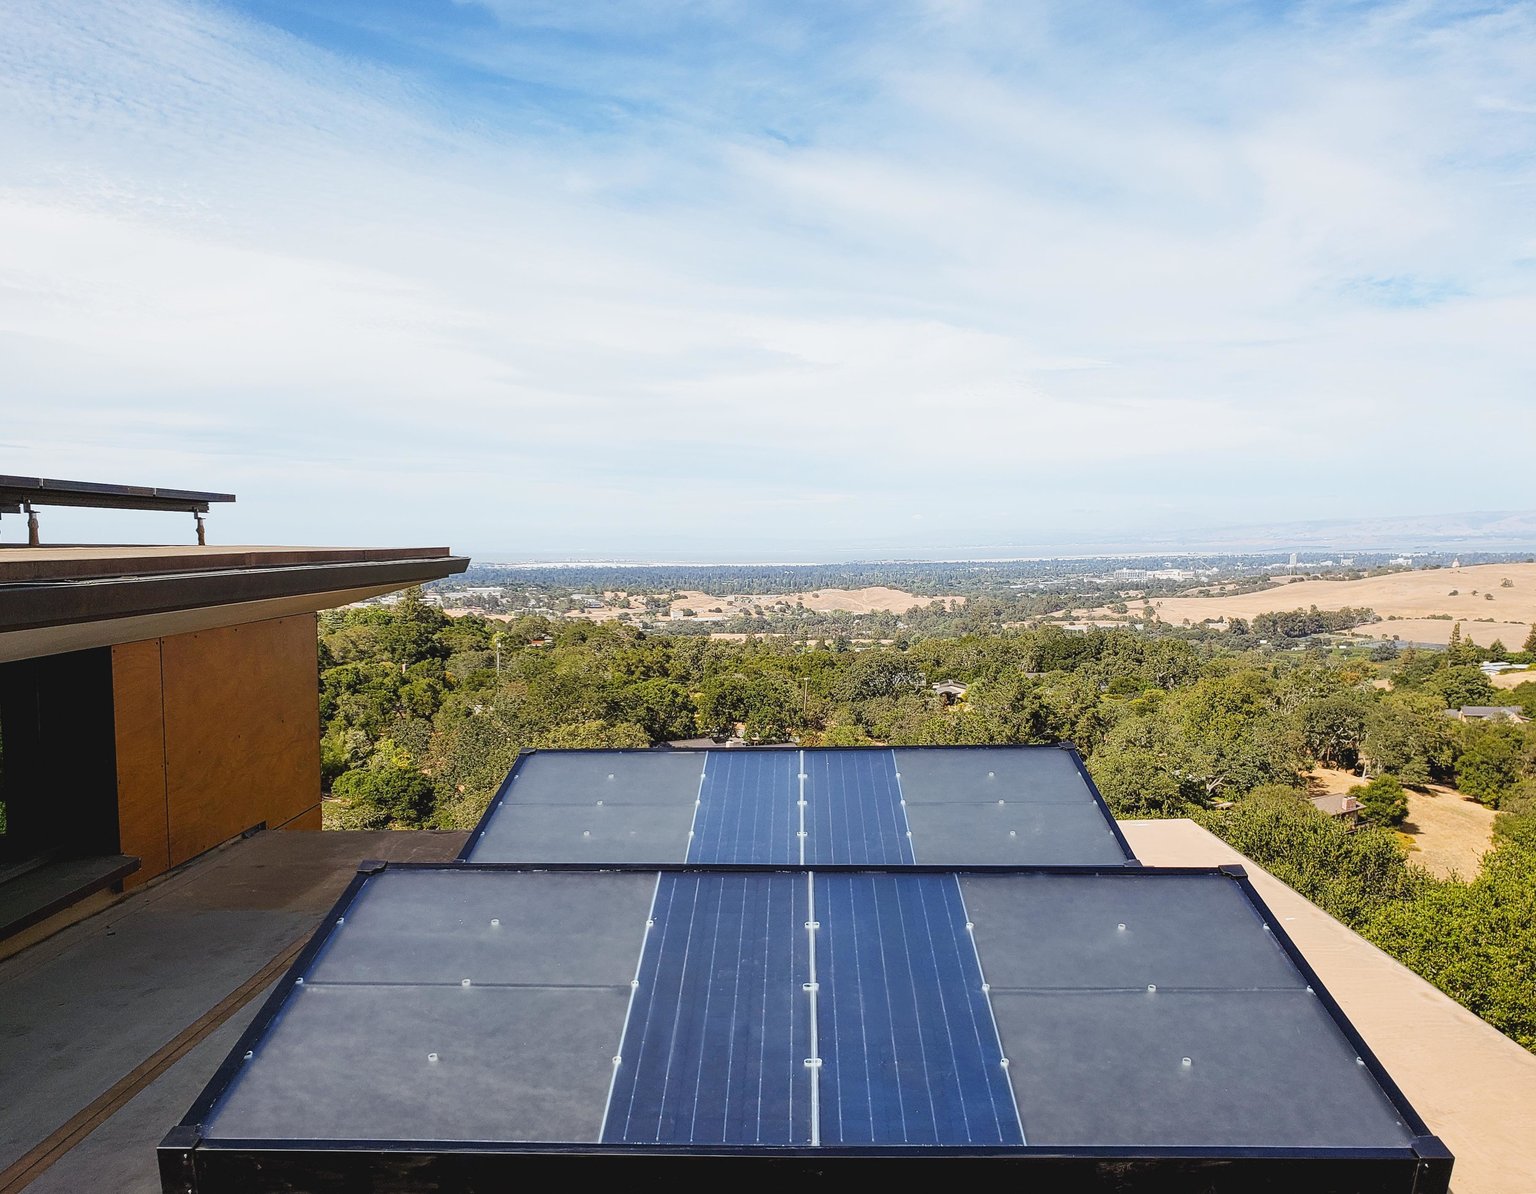 Zero Mass Water $2,000 Solar Panels Pull Clean Drinking Water Out of the Air